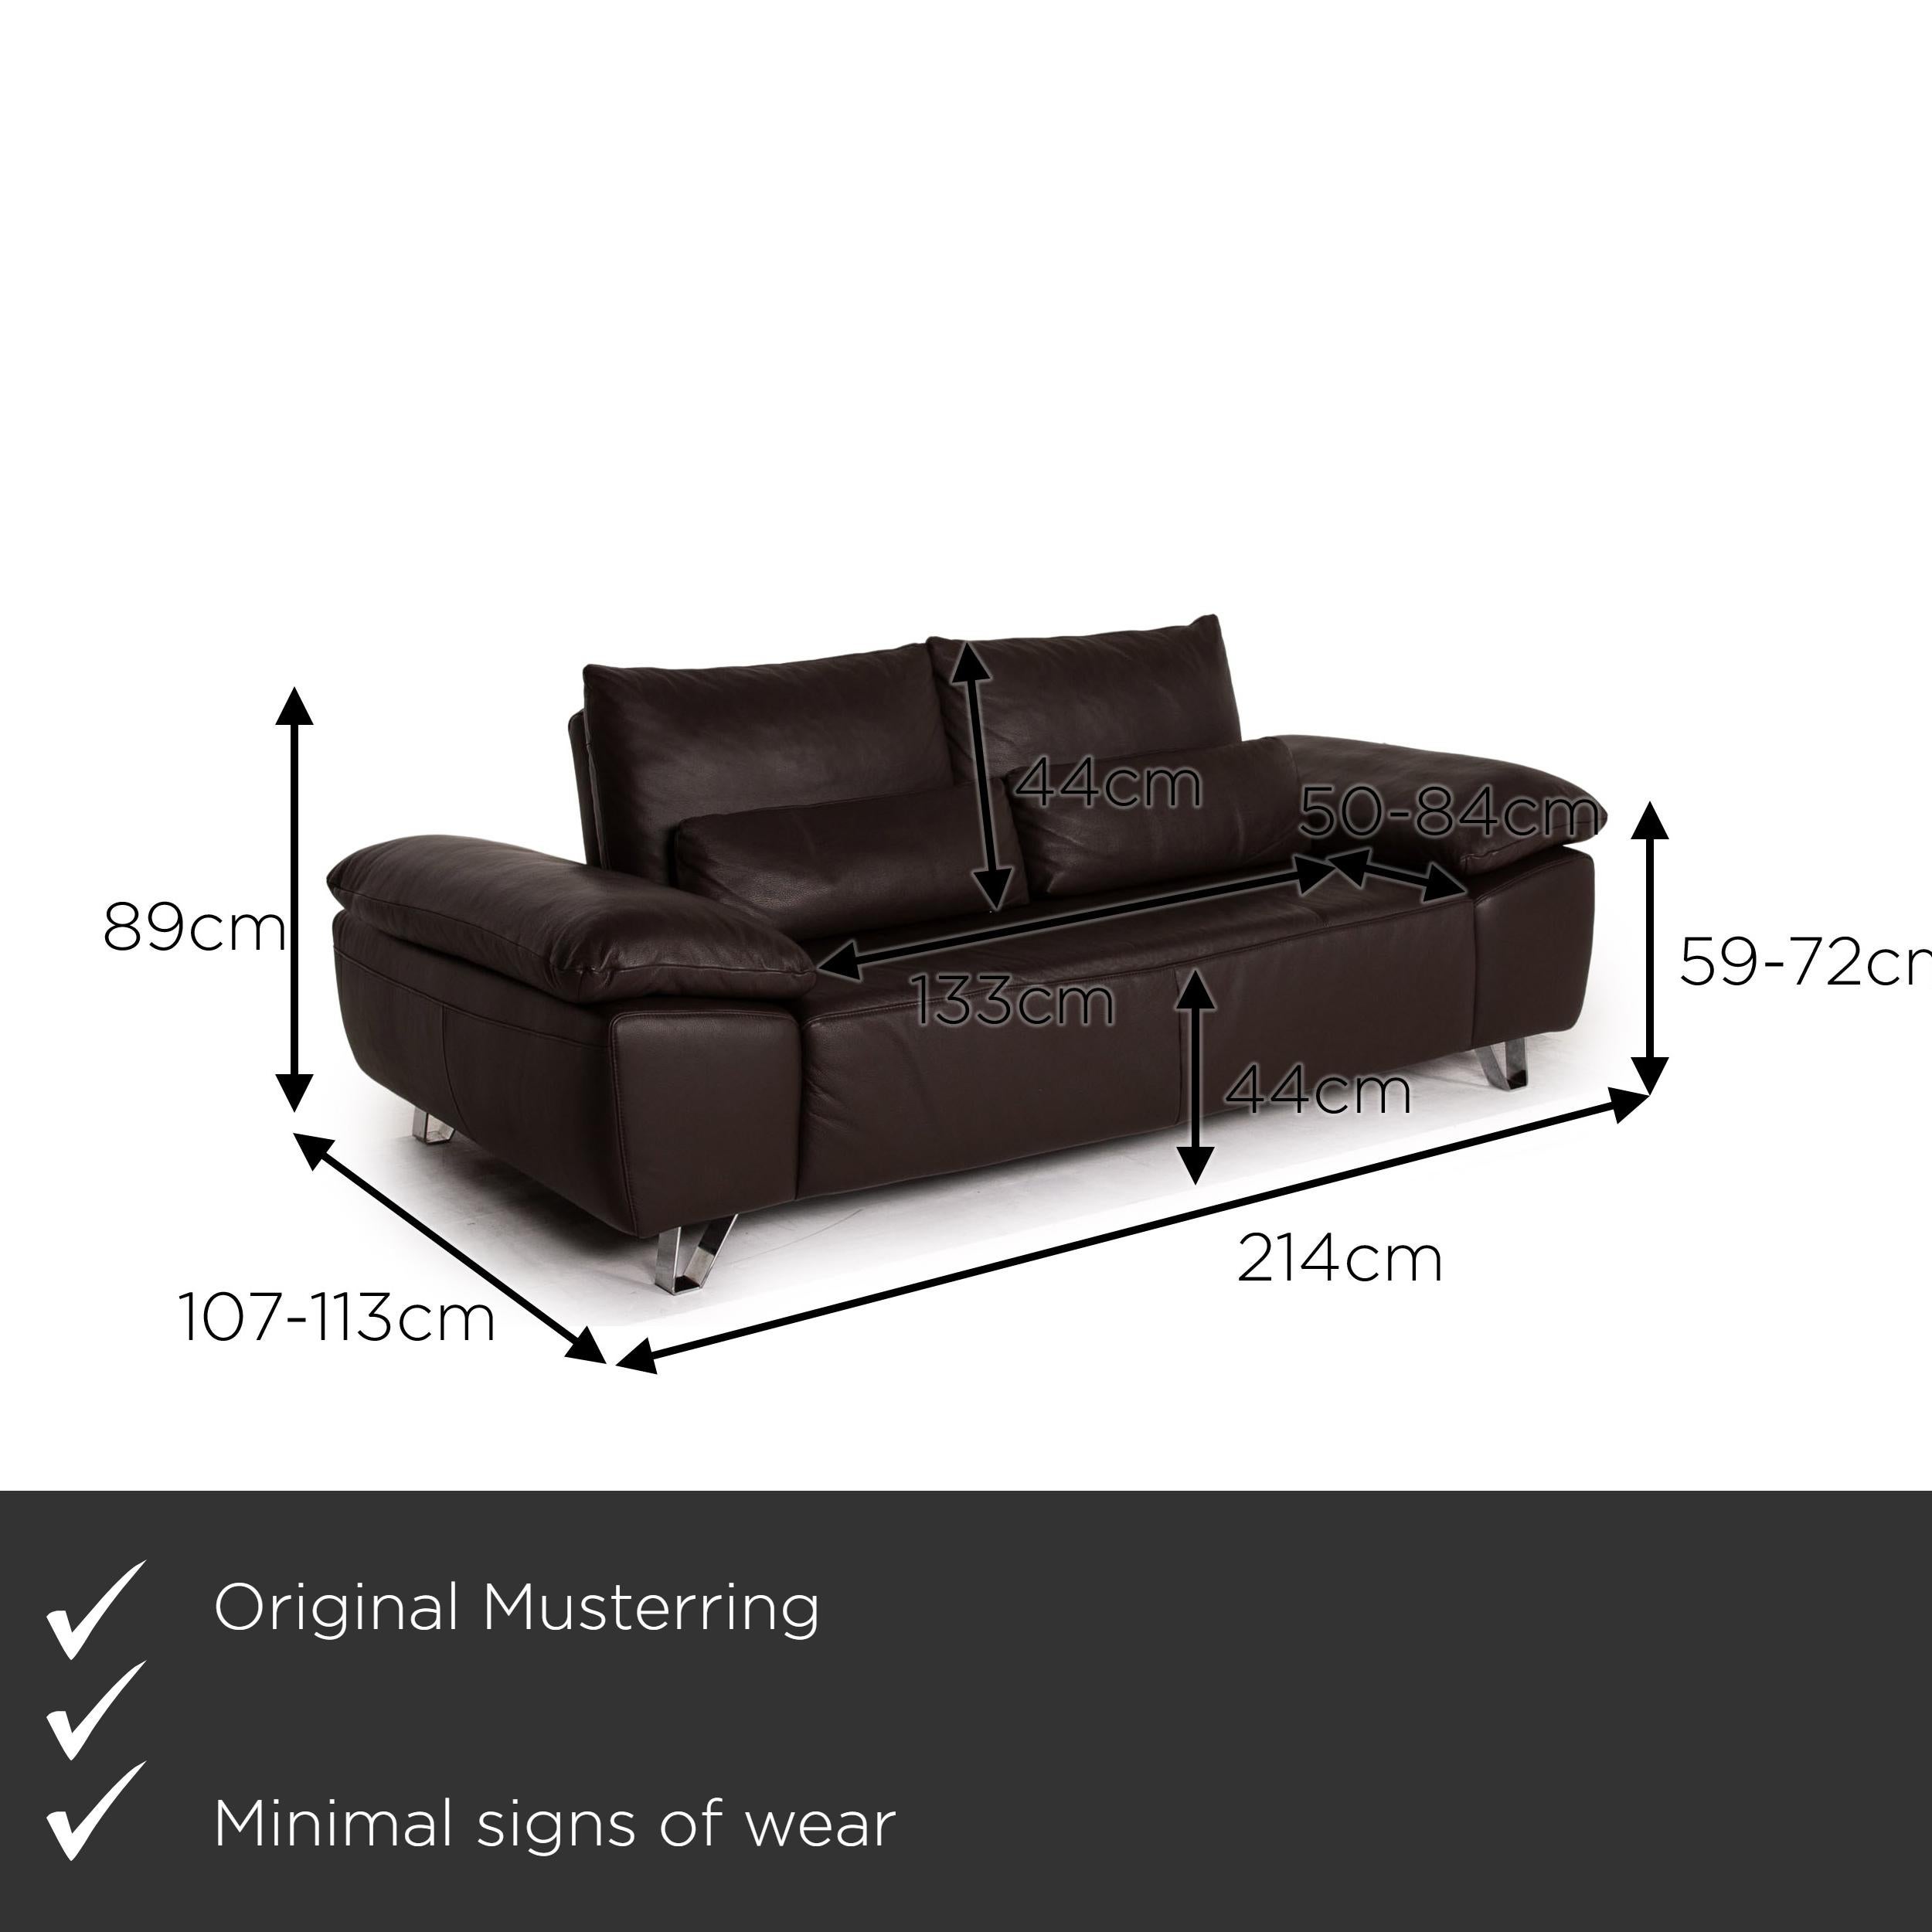 We present to you a Musterring MR 680 two-seater sofa brown leather couch function.
  
 

 Product measurements in centimeters:
 

 depth: 107
 width: 214
 height: 89
 seat height: 44
 rest height: 59
 seat depth: 50
 seat width: 133
